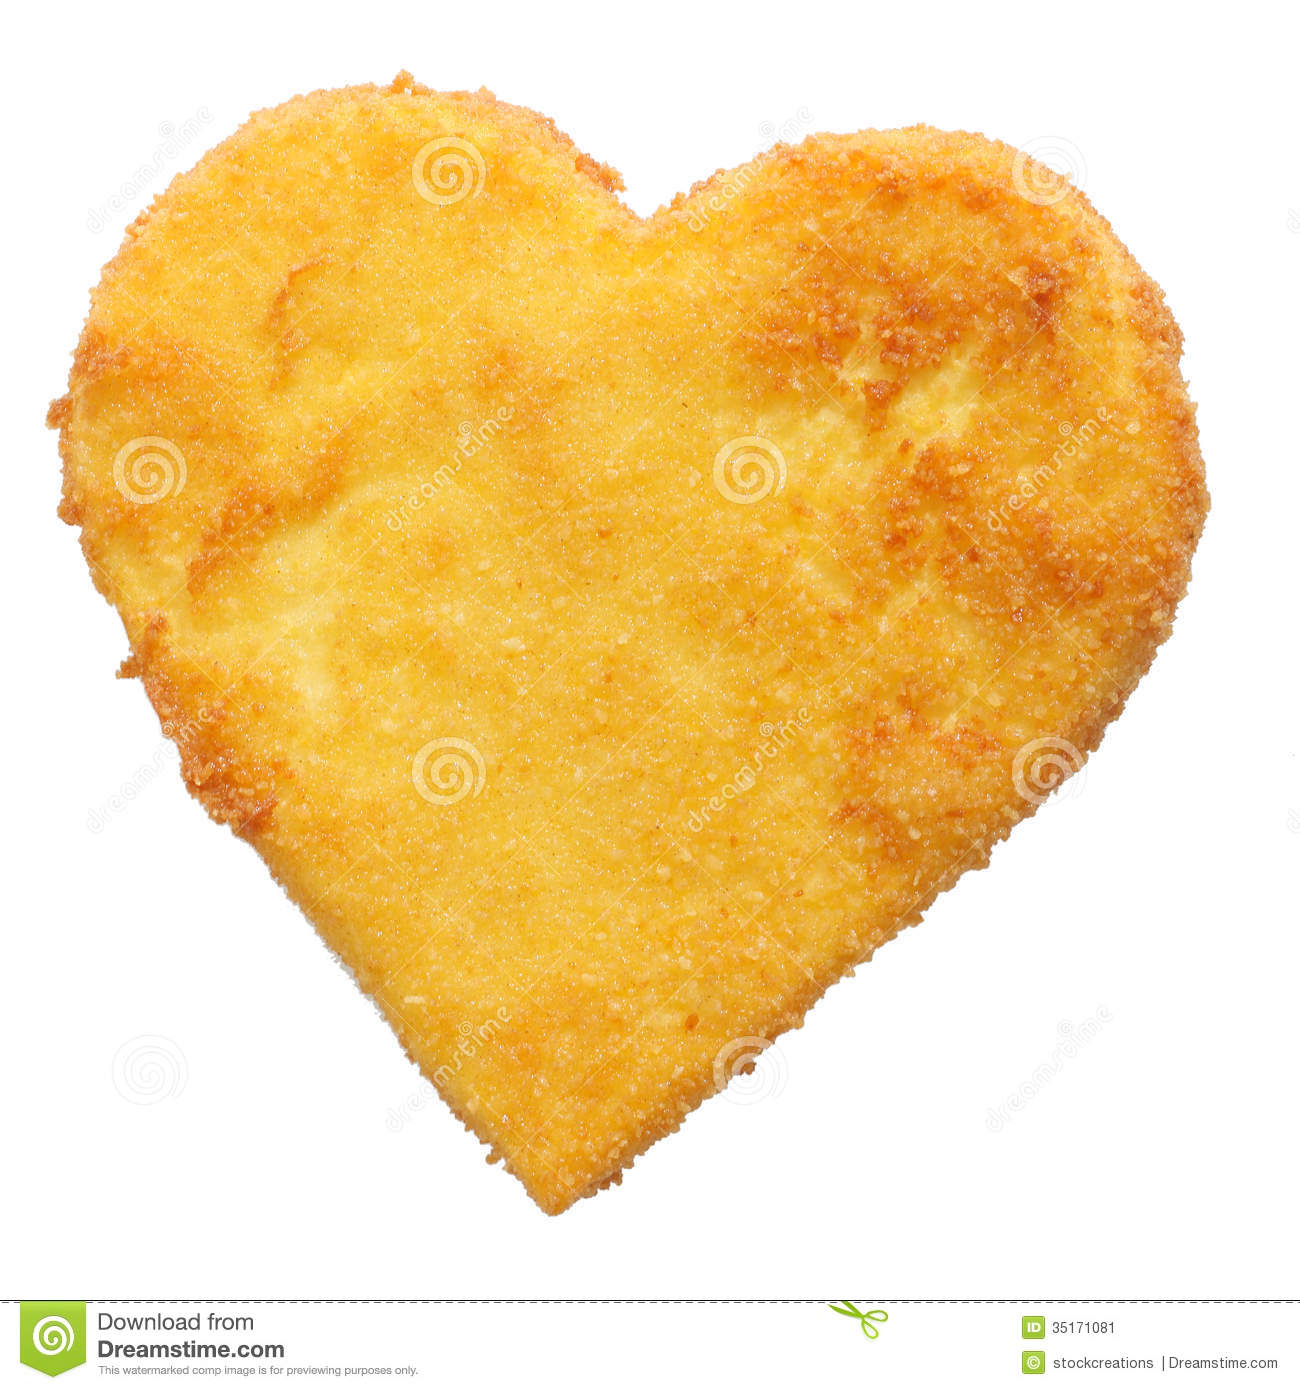 Fried Cheese Fish Or Chicken Meat In Heart Shape Stock Image   Image    